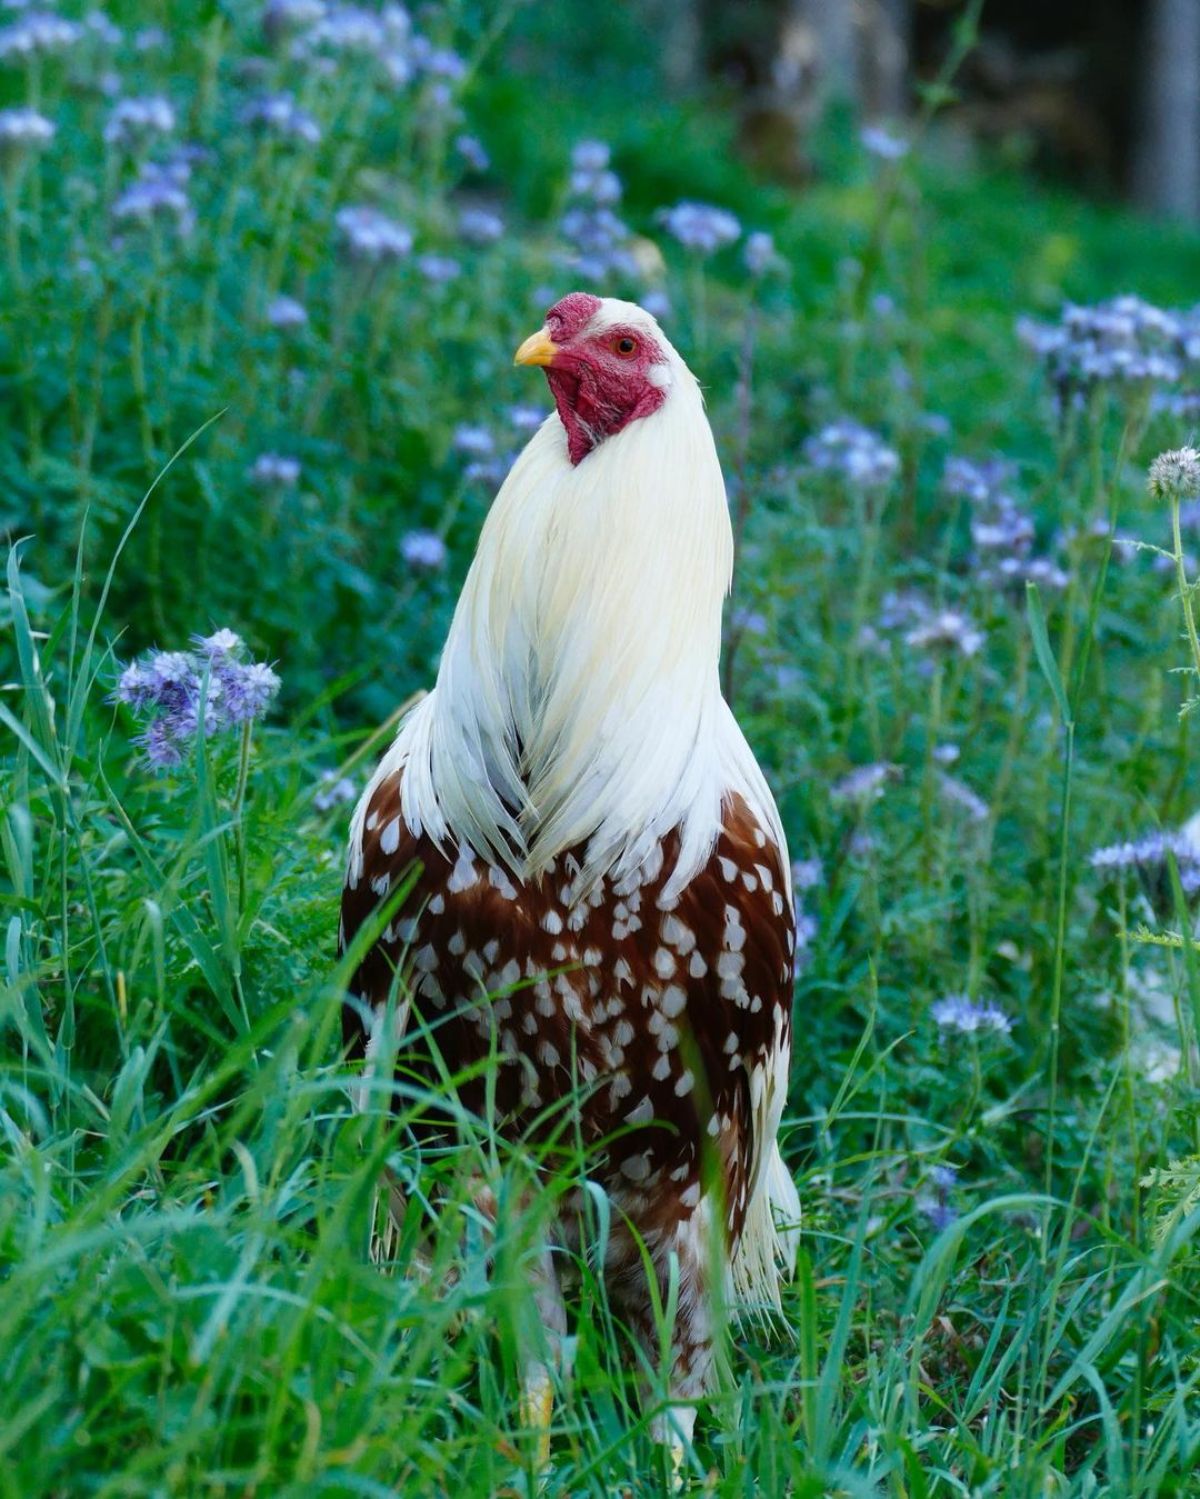 A tall Yokohama rooster standing on a meadow.